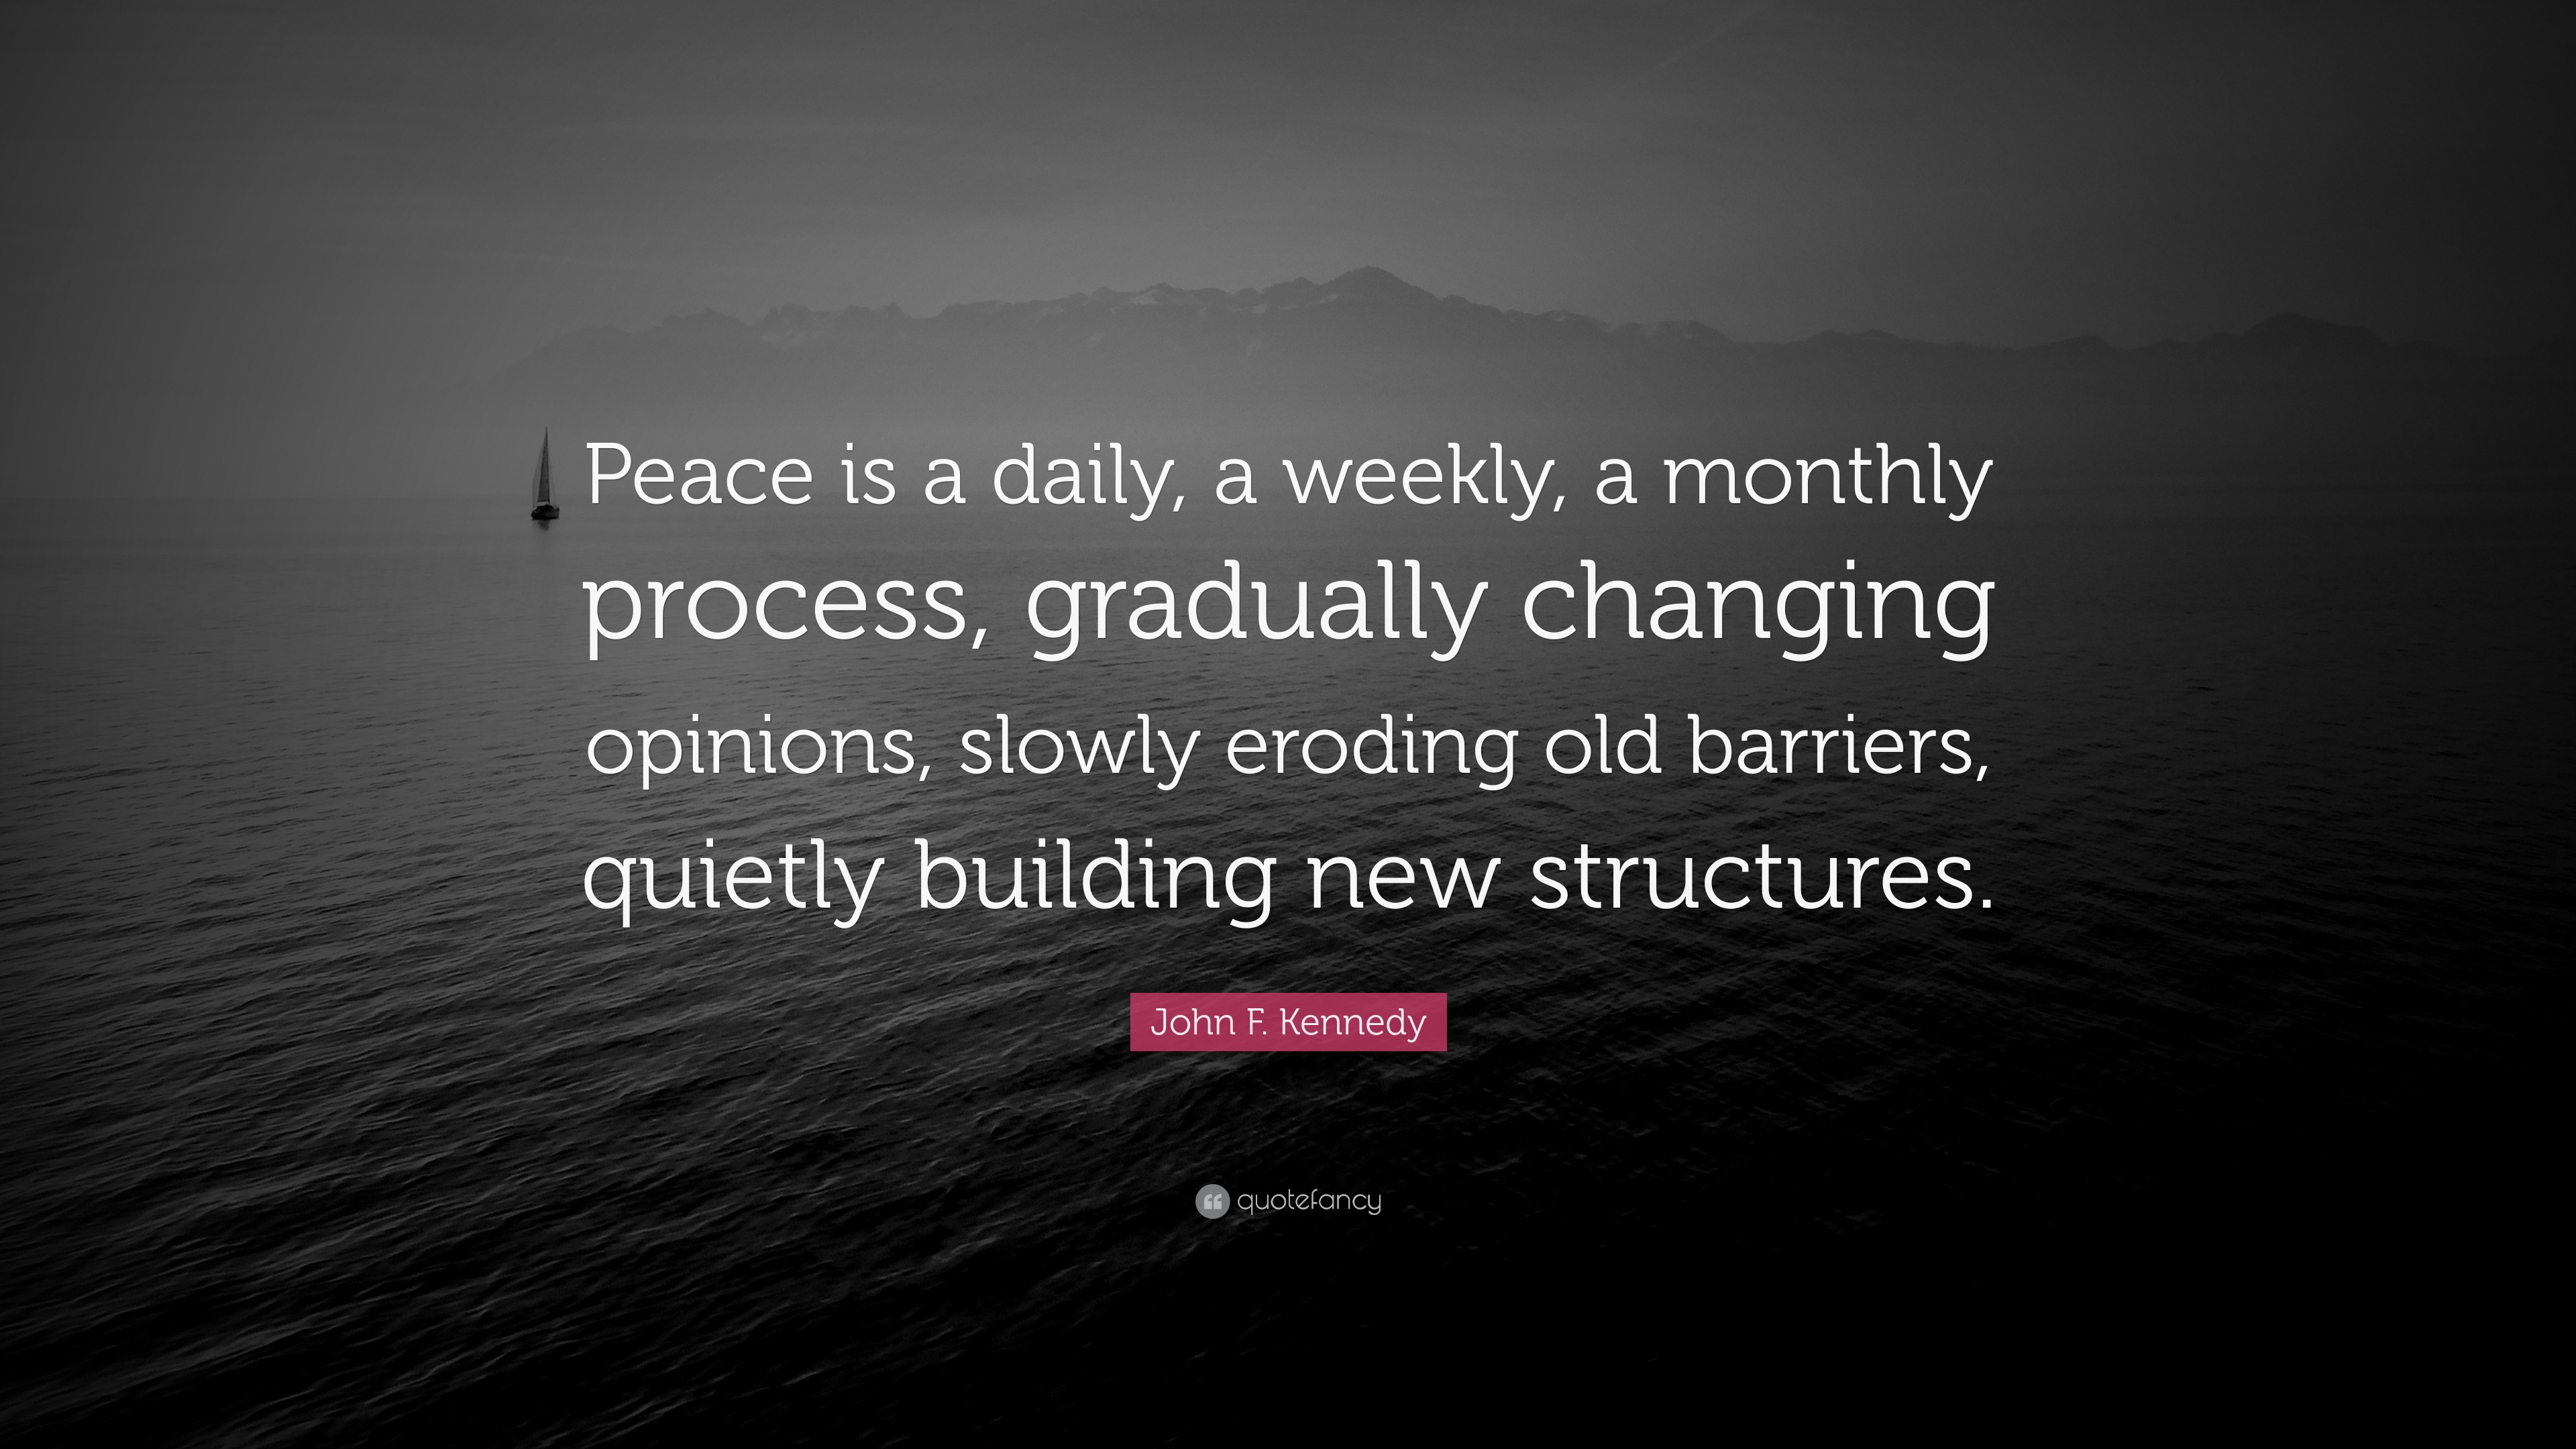 John F. Kennedy Quote: “Peace is a daily, a weekly, a monthly process ...